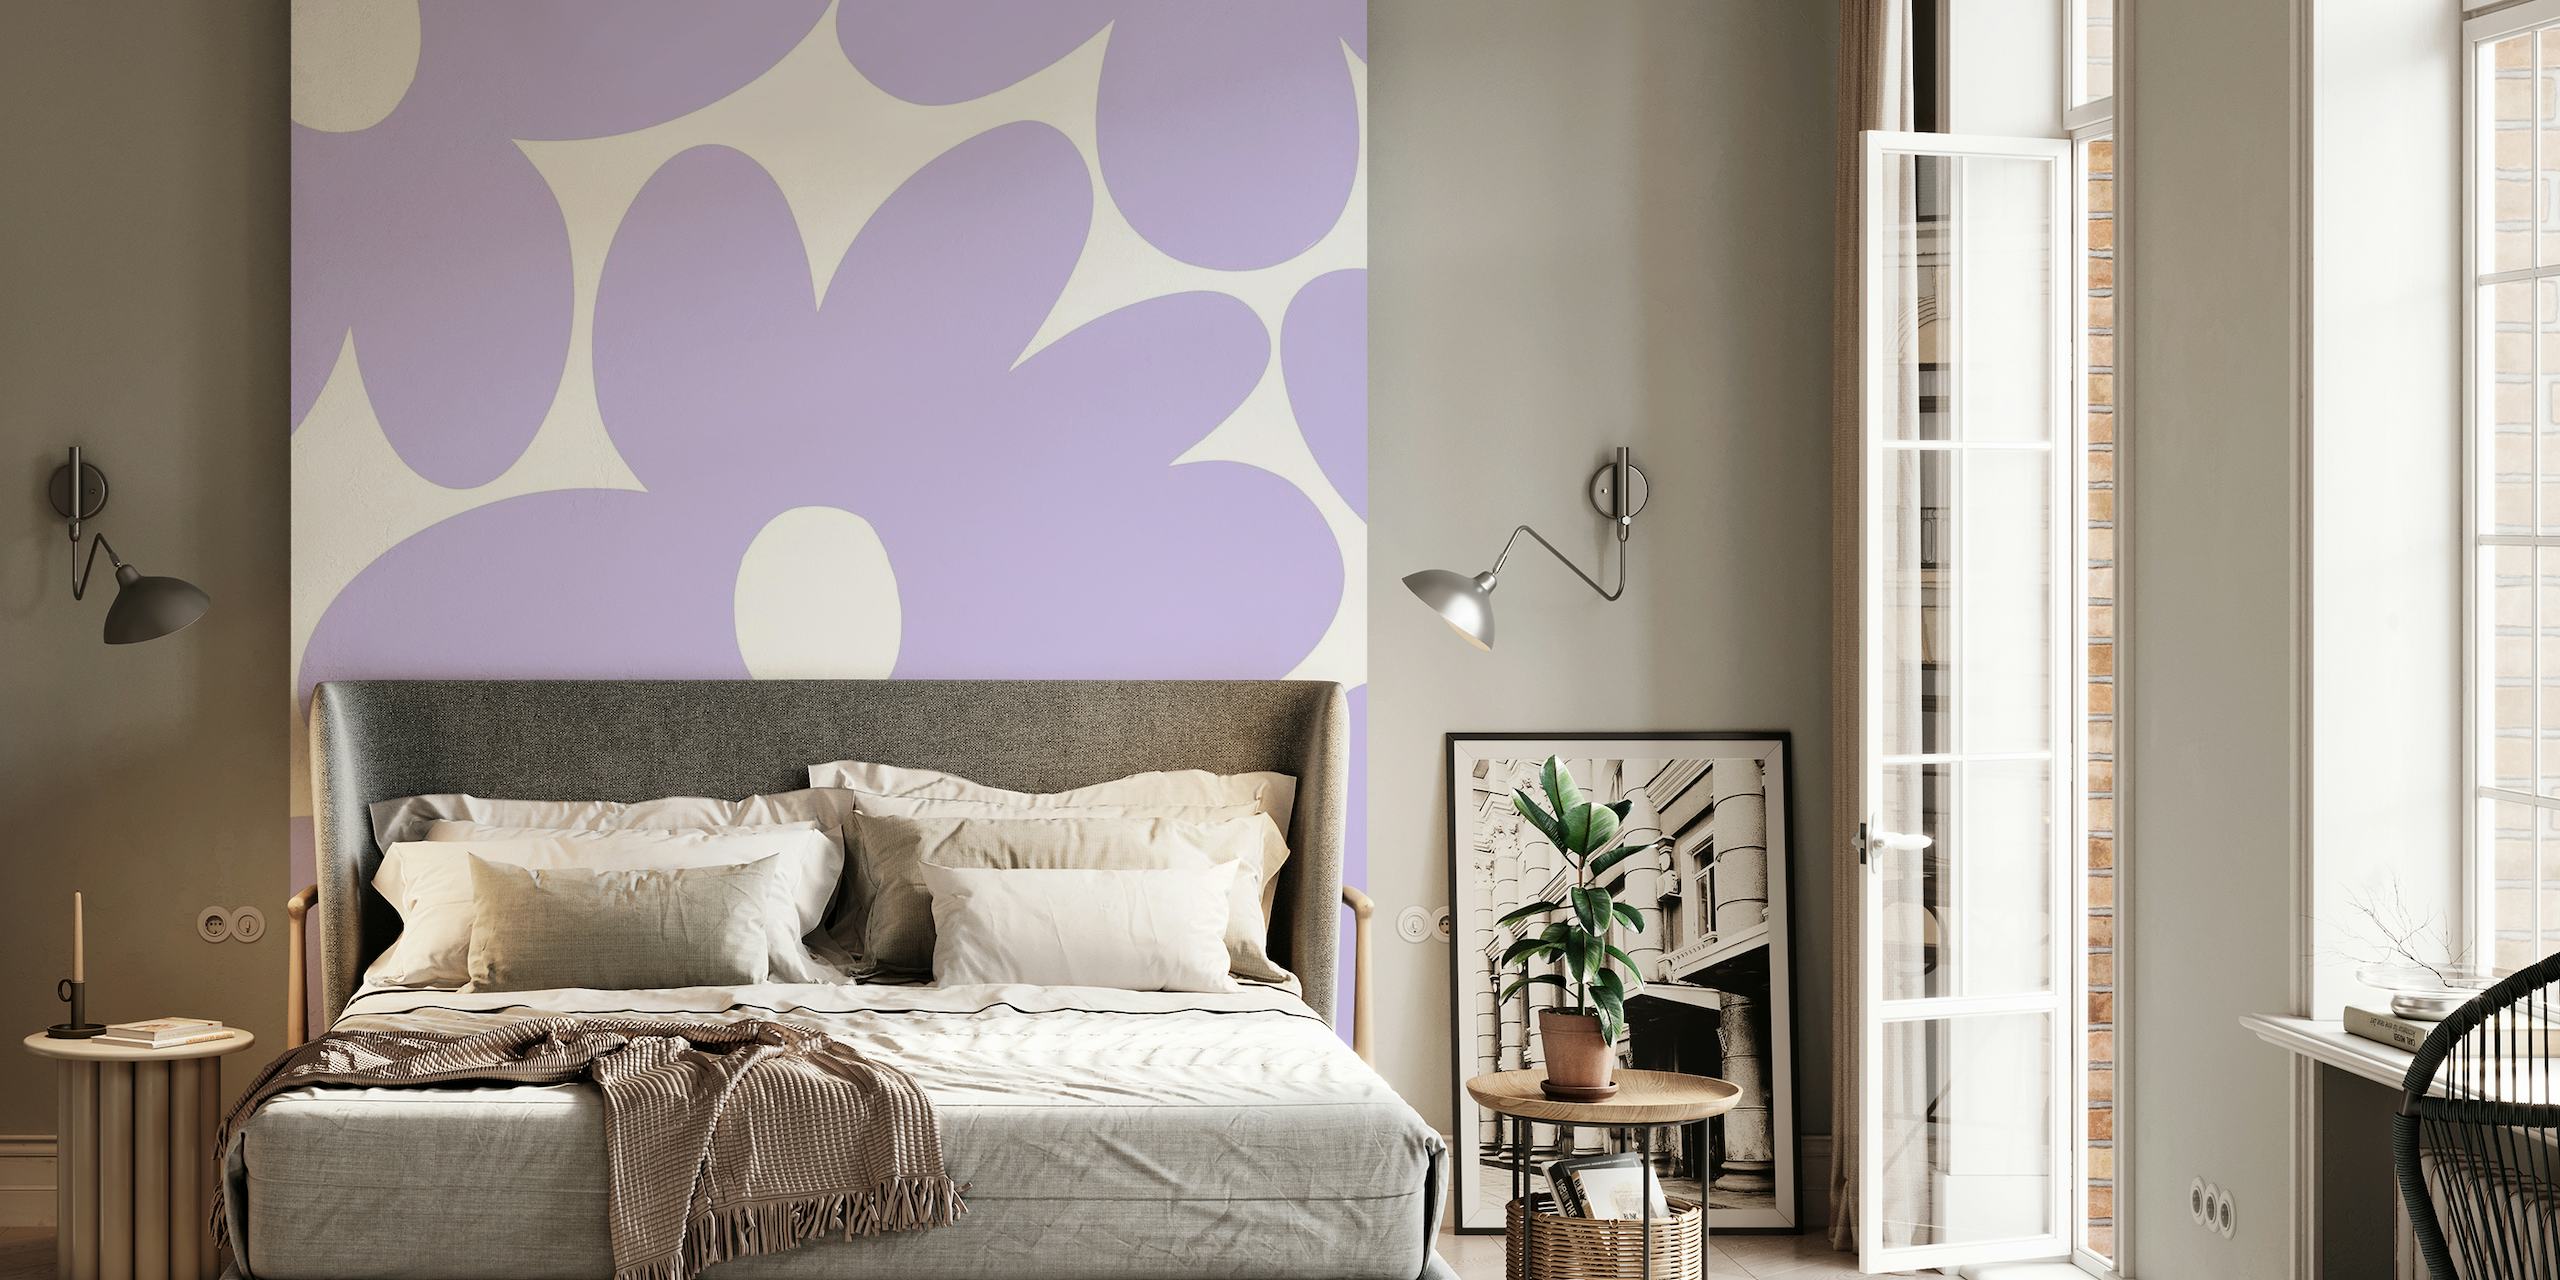 Retro daisy flowers wall mural in lavender and white palette